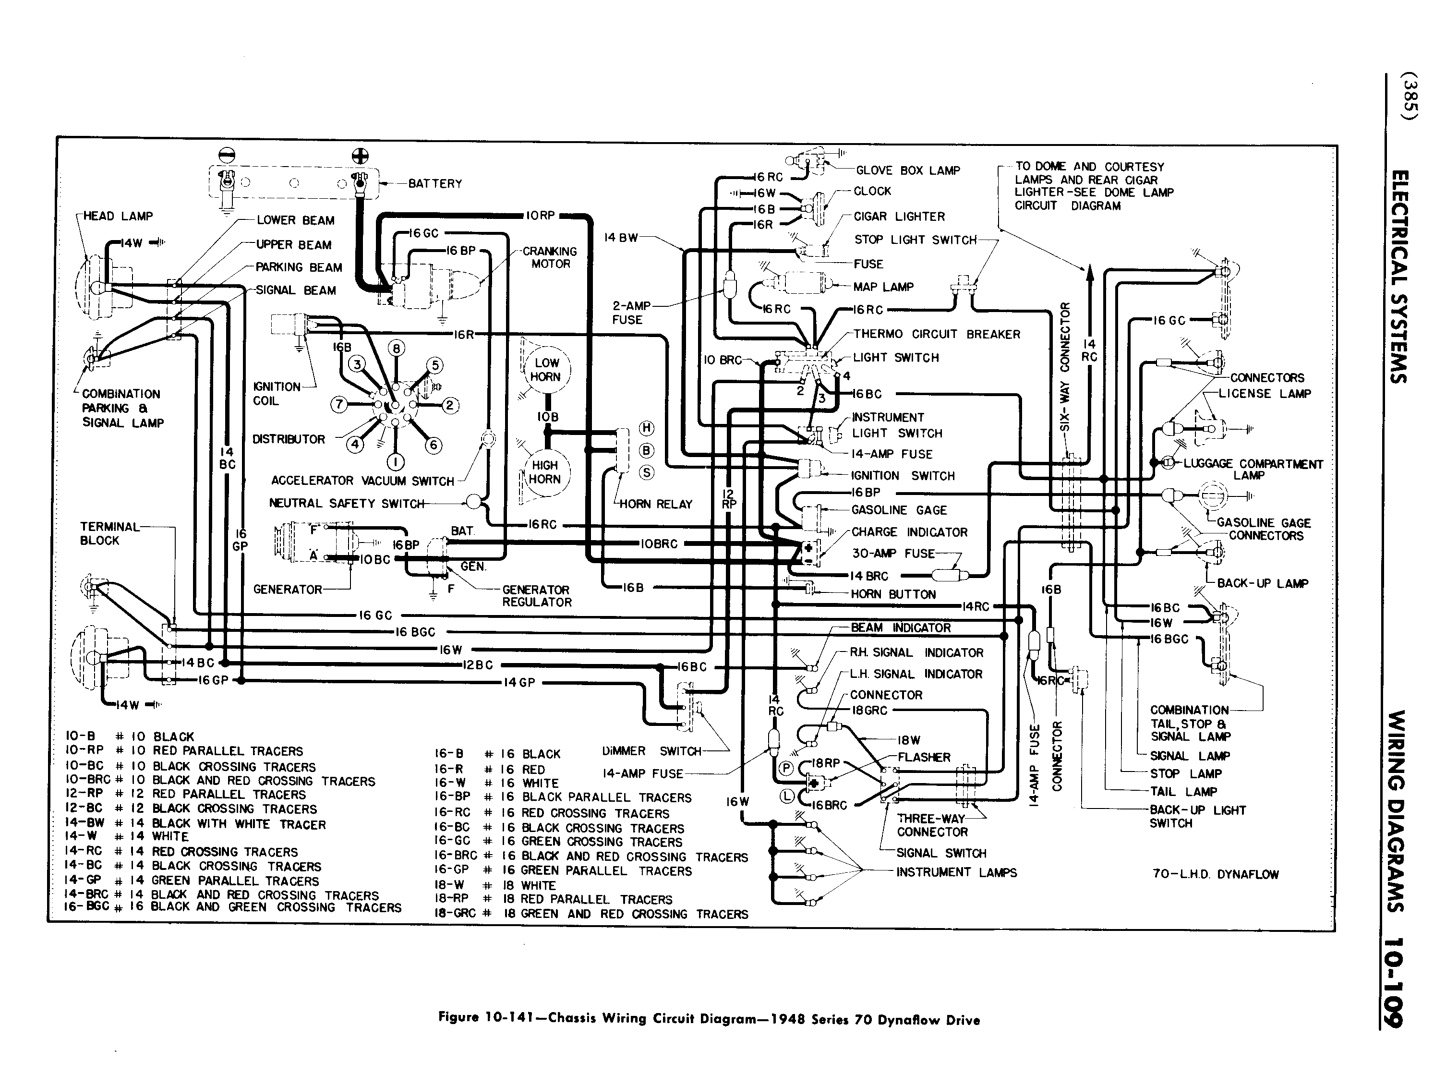 n_11 1948 Buick Shop Manual - Electrical Systems-109-109.jpg